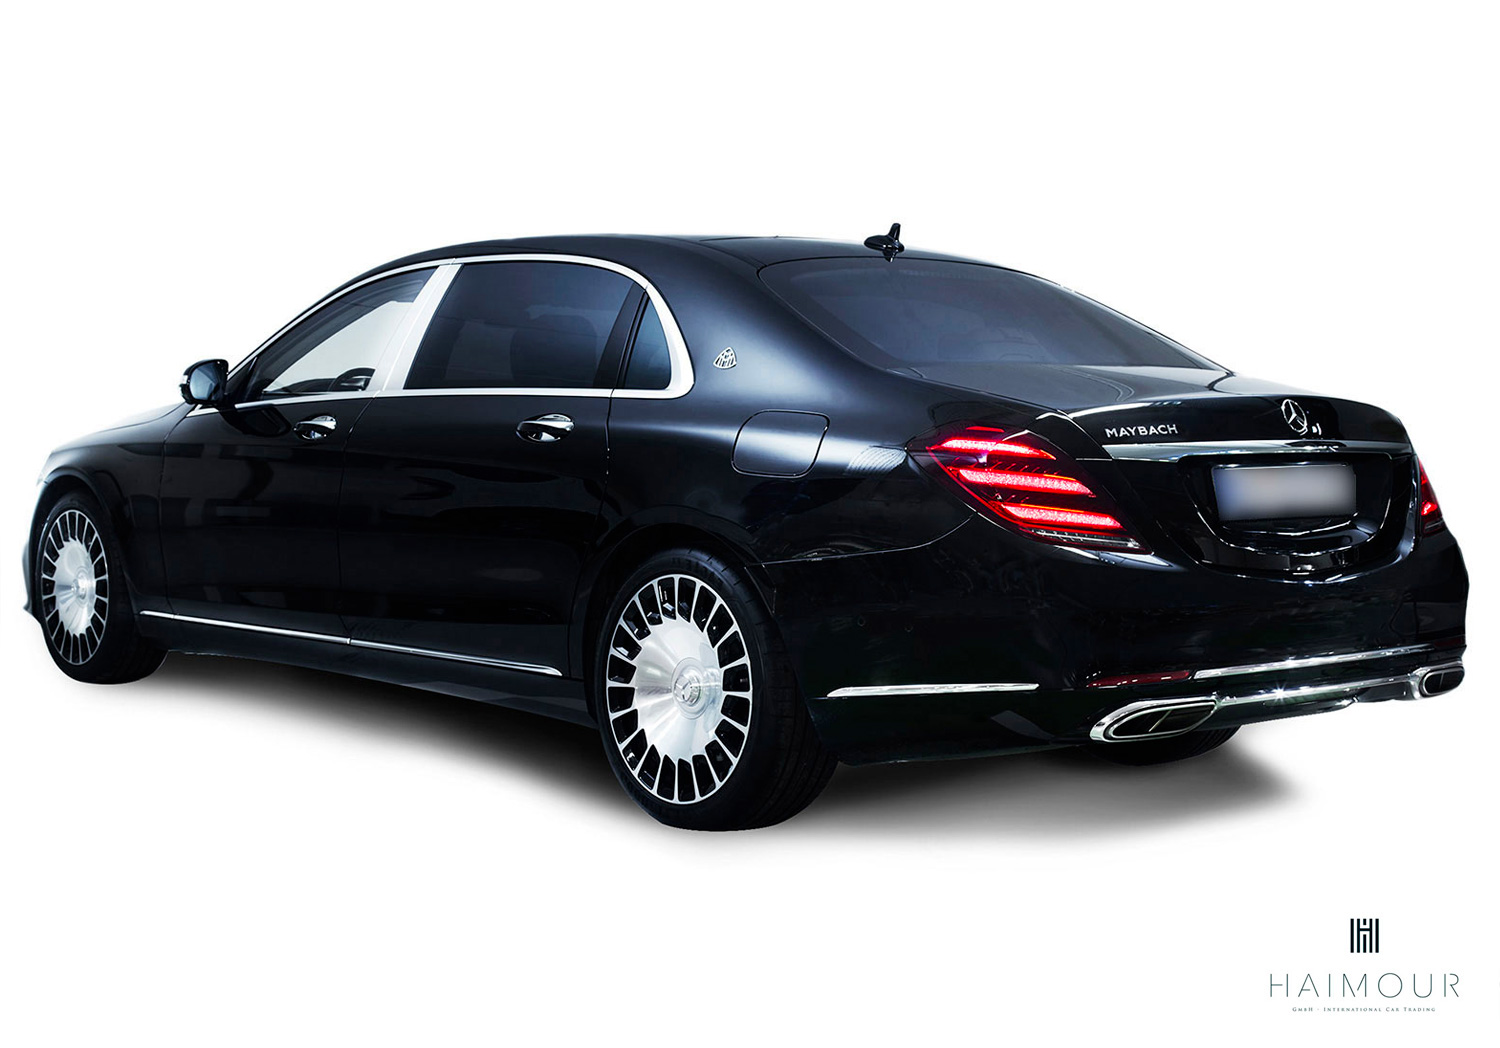 Location d'une MAYBACH 560